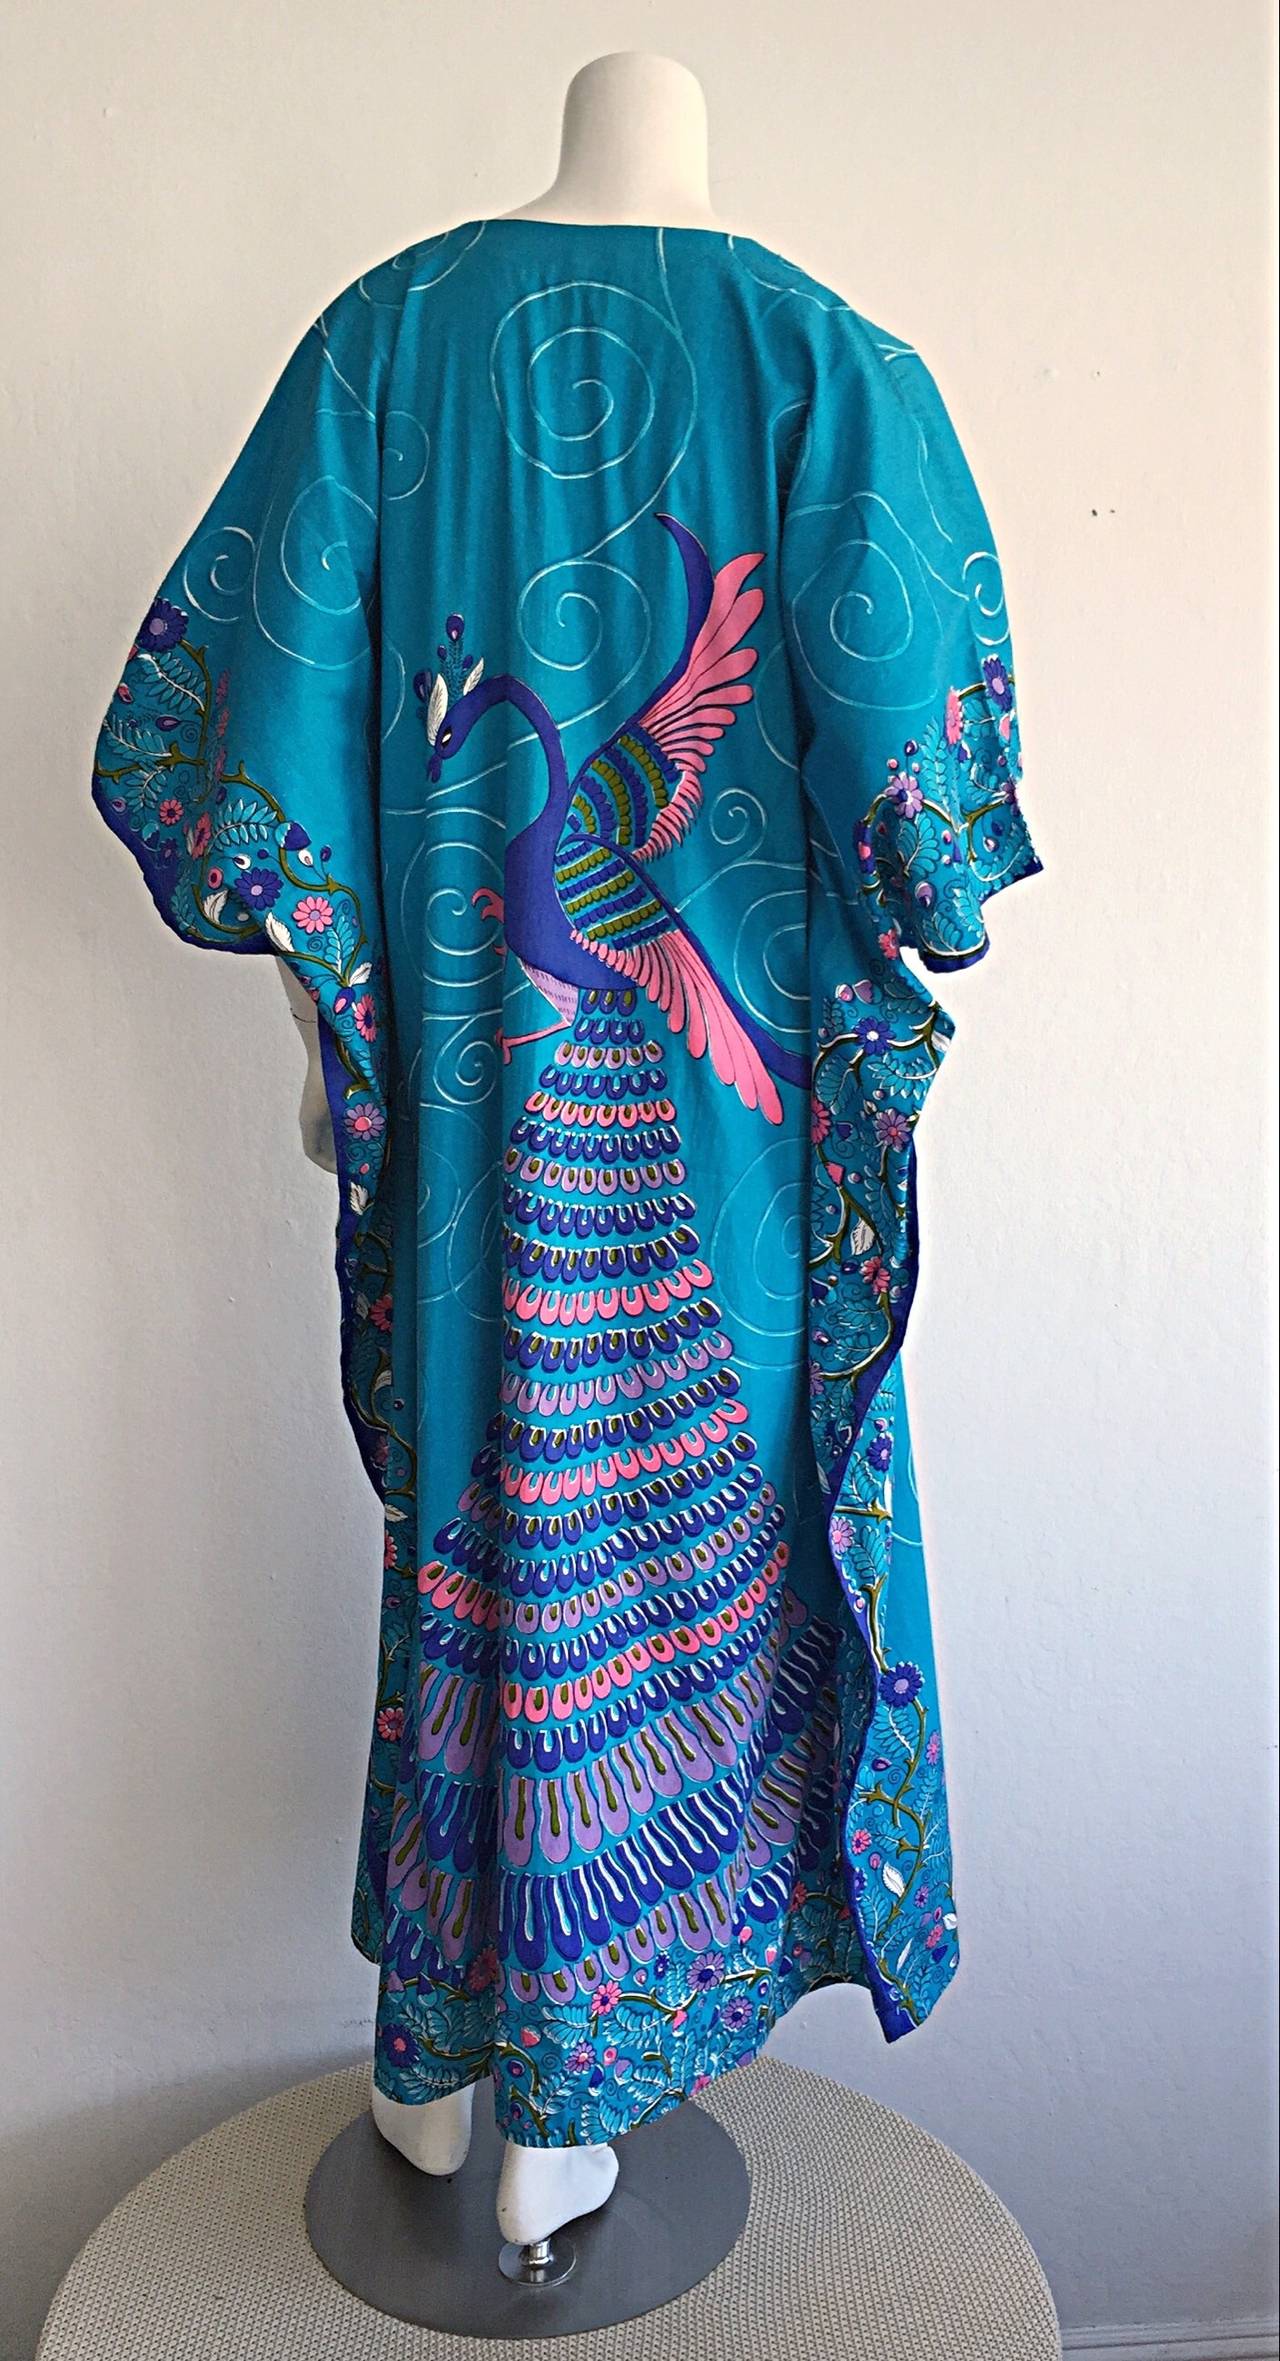 Amazing Vintage Neiman Marcus Peacock Asian Themed Colorful Cotton ...